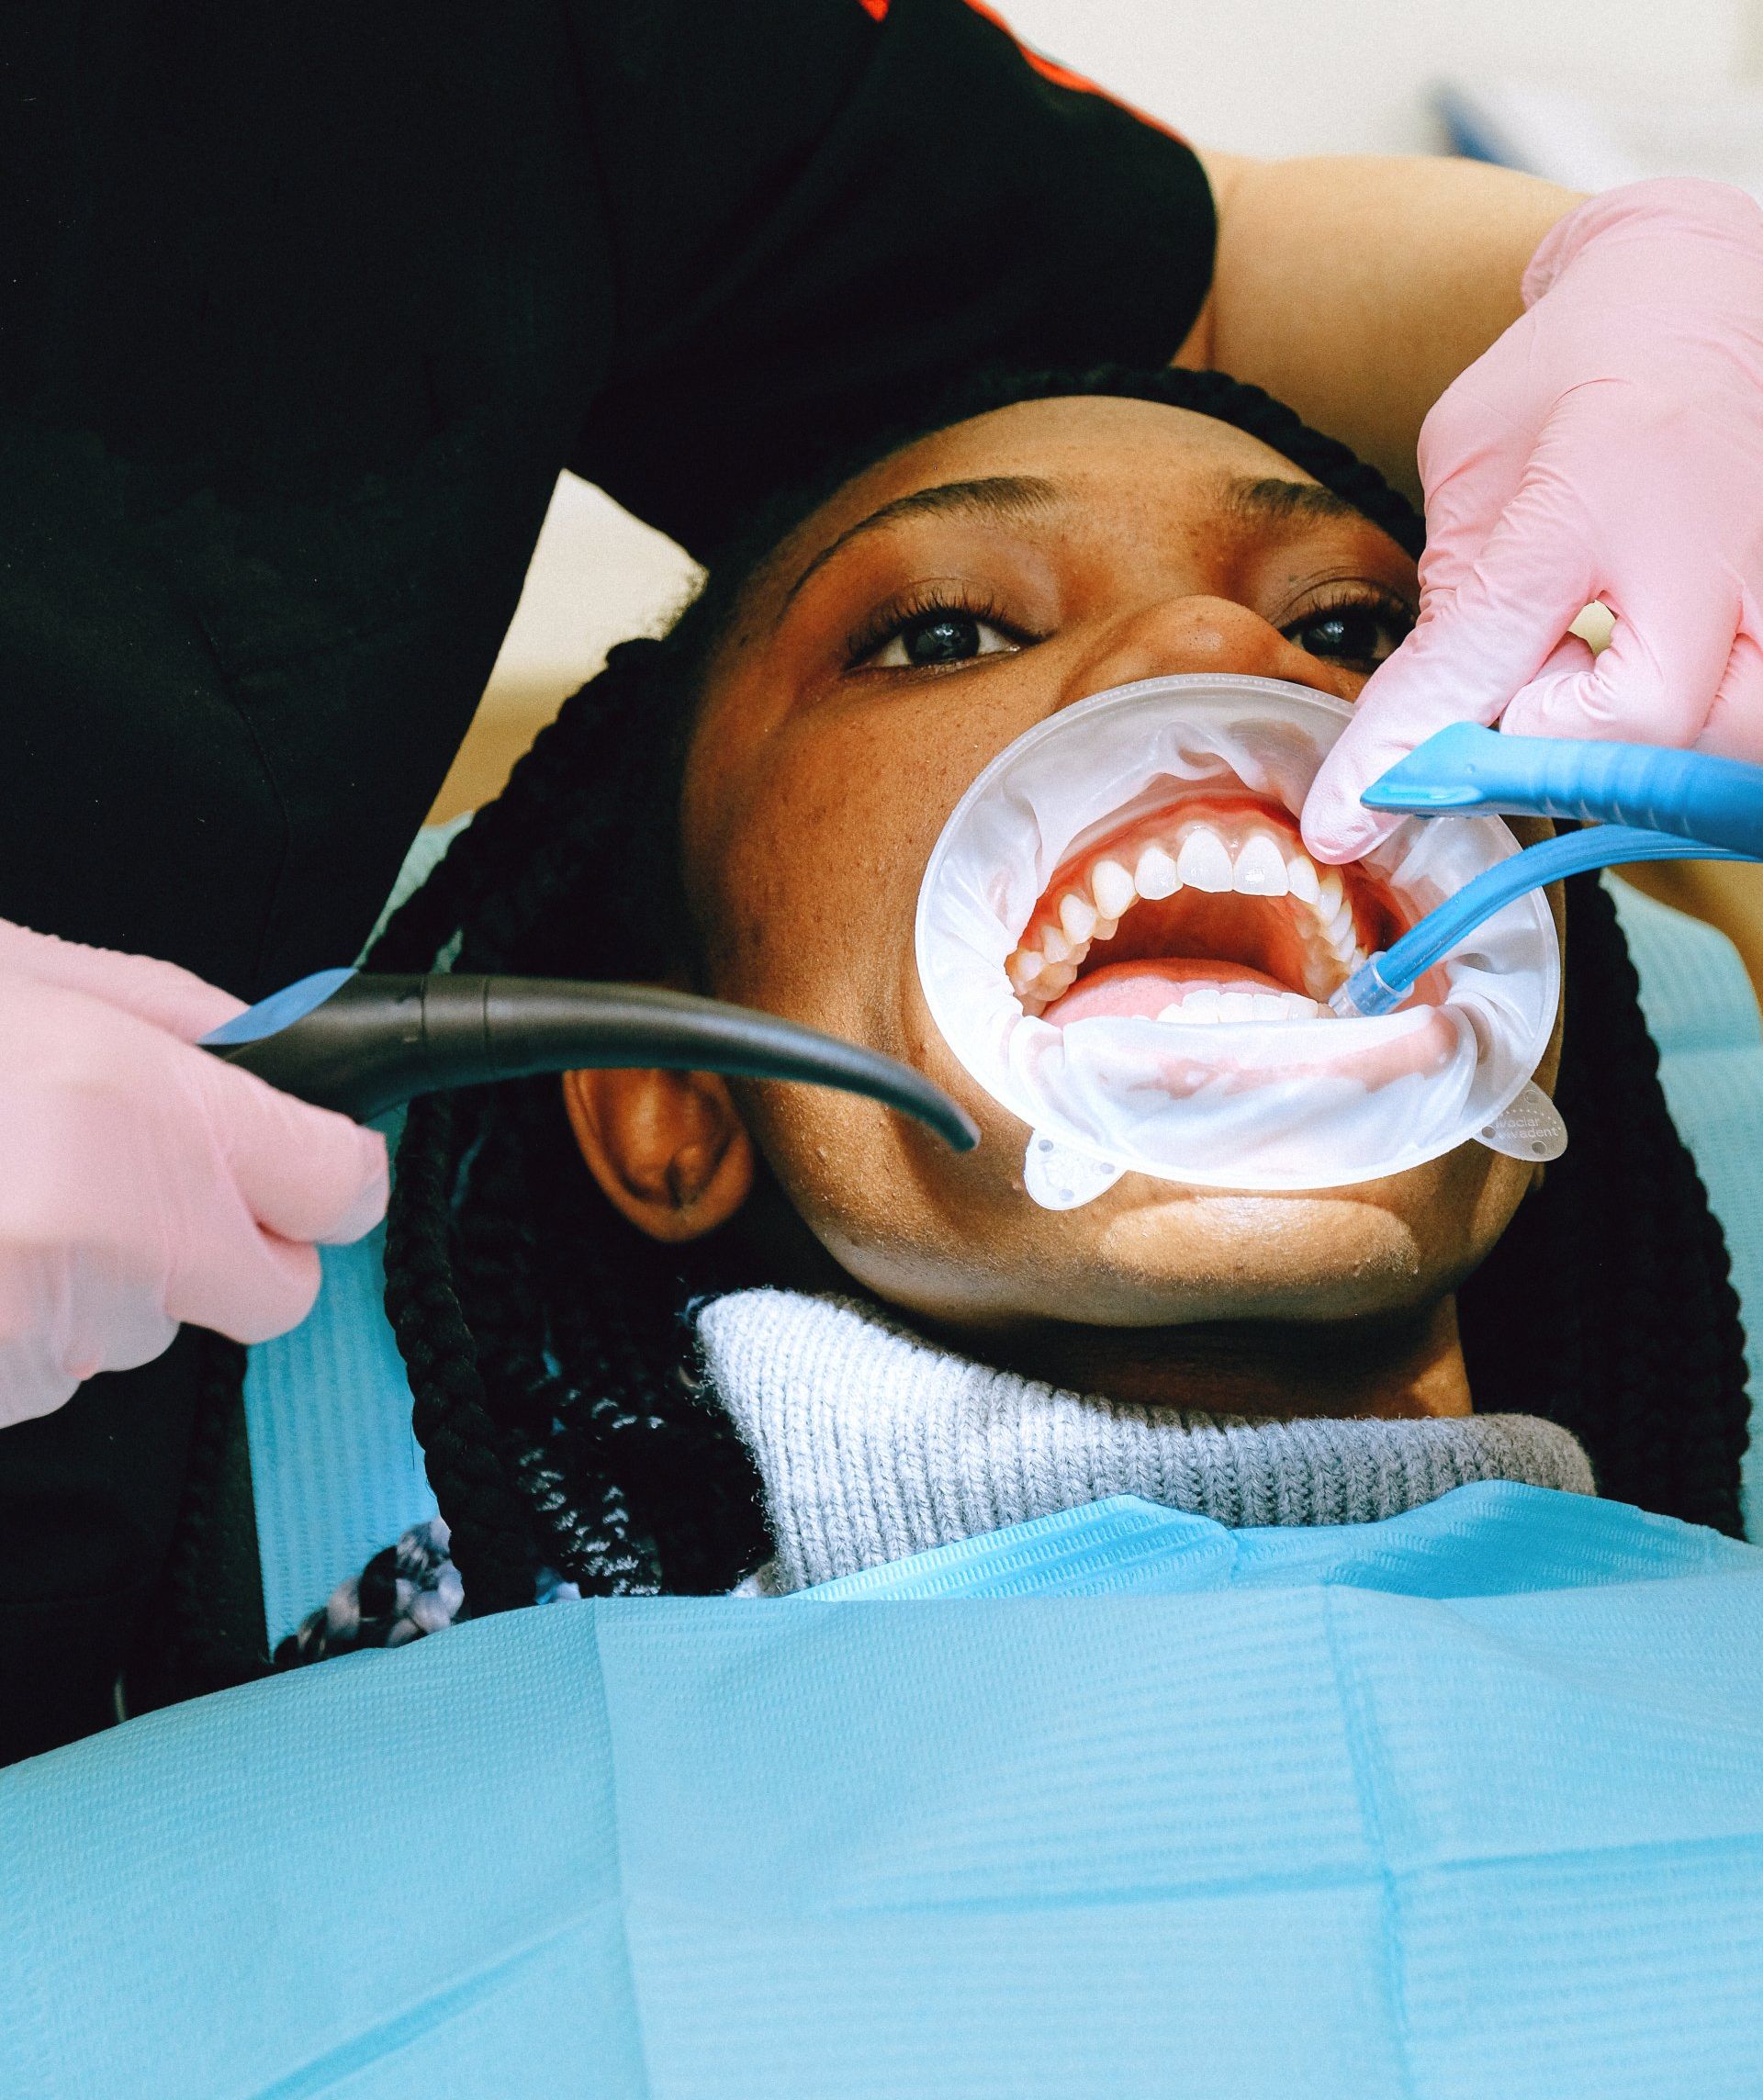 A woman is getting her teeth examined by a dentist